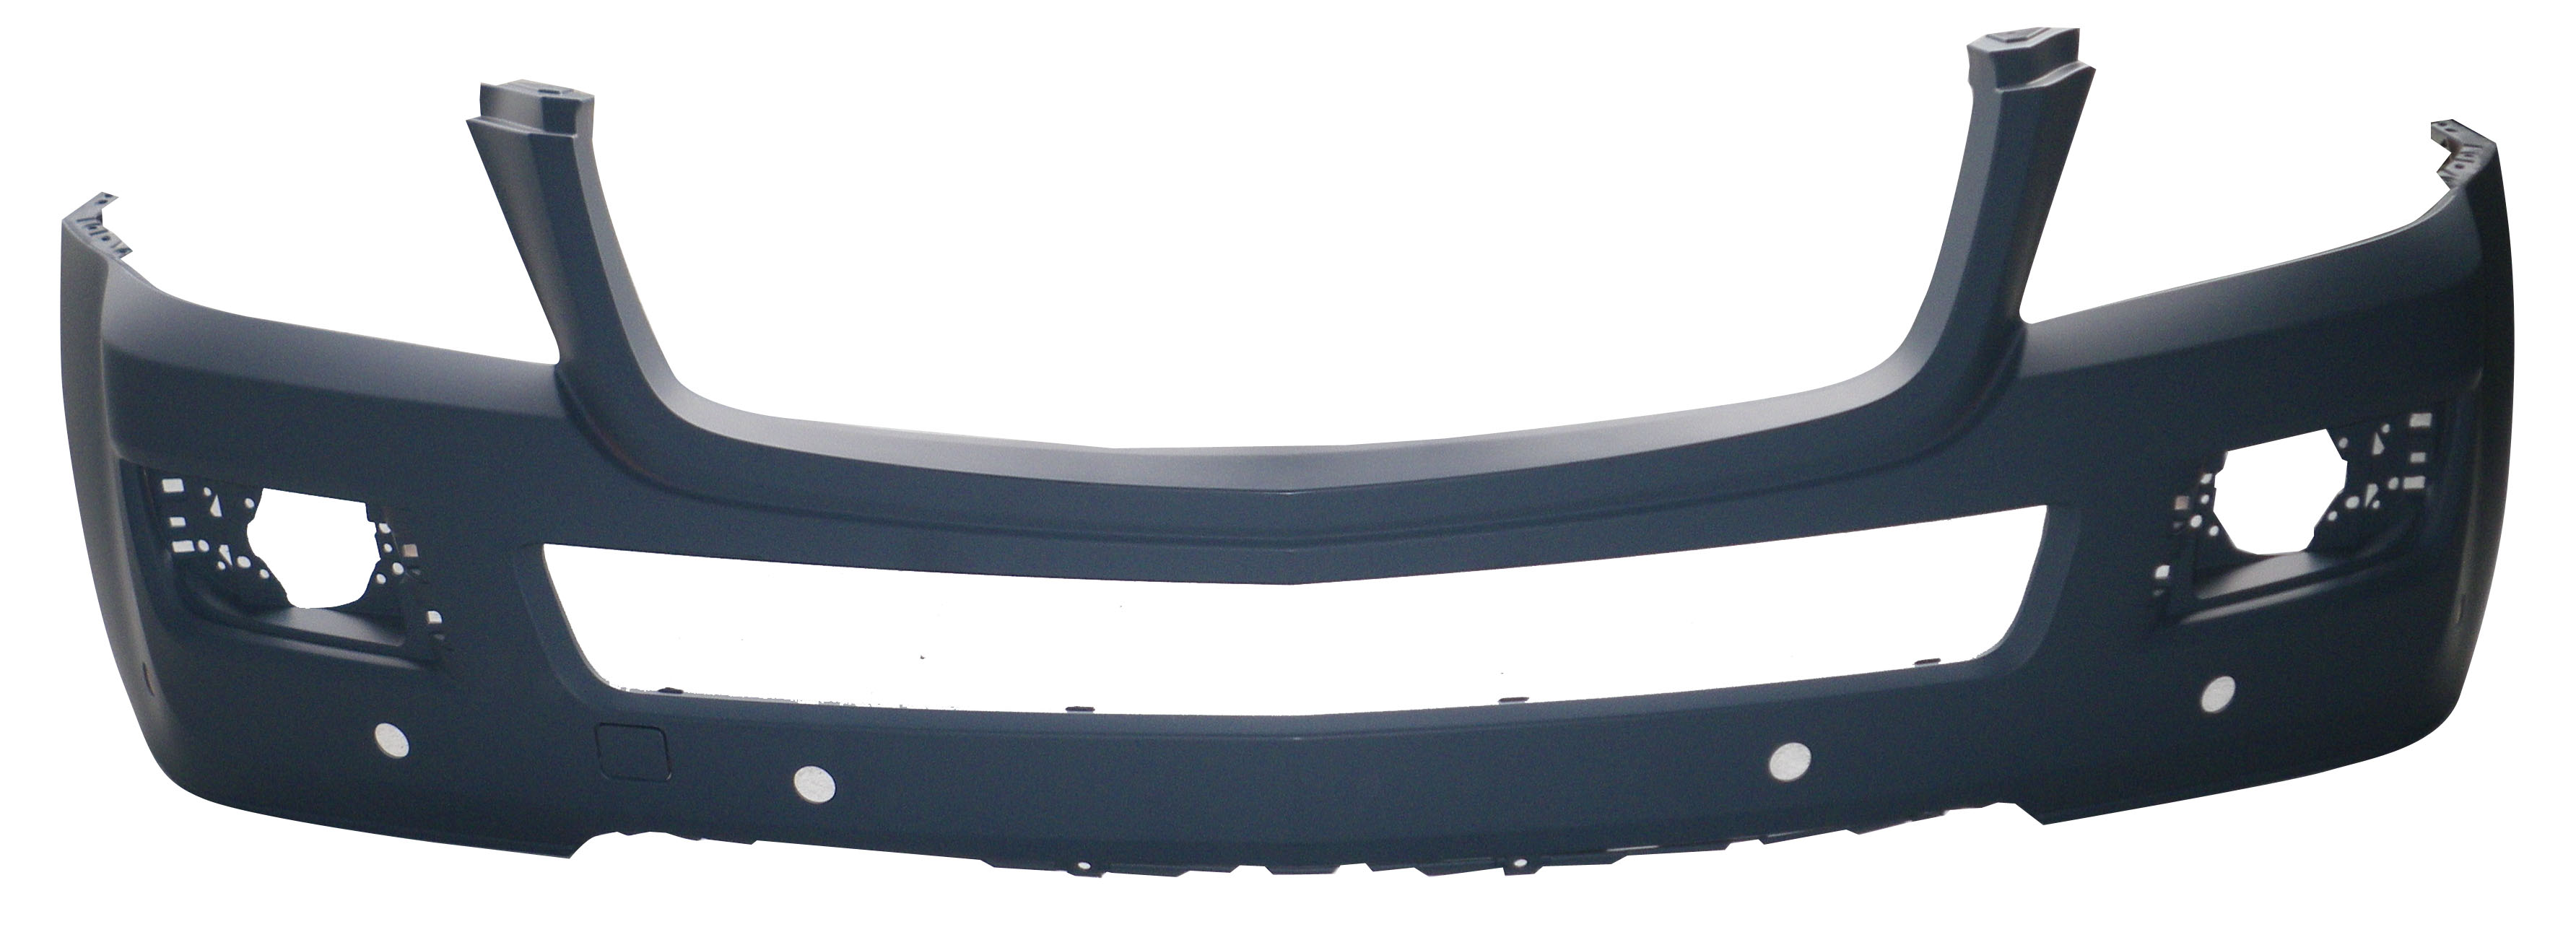 Aftermarket BUMPER COVERS for MERCEDES-BENZ - GL550, GL550,08-09,Front bumper cover